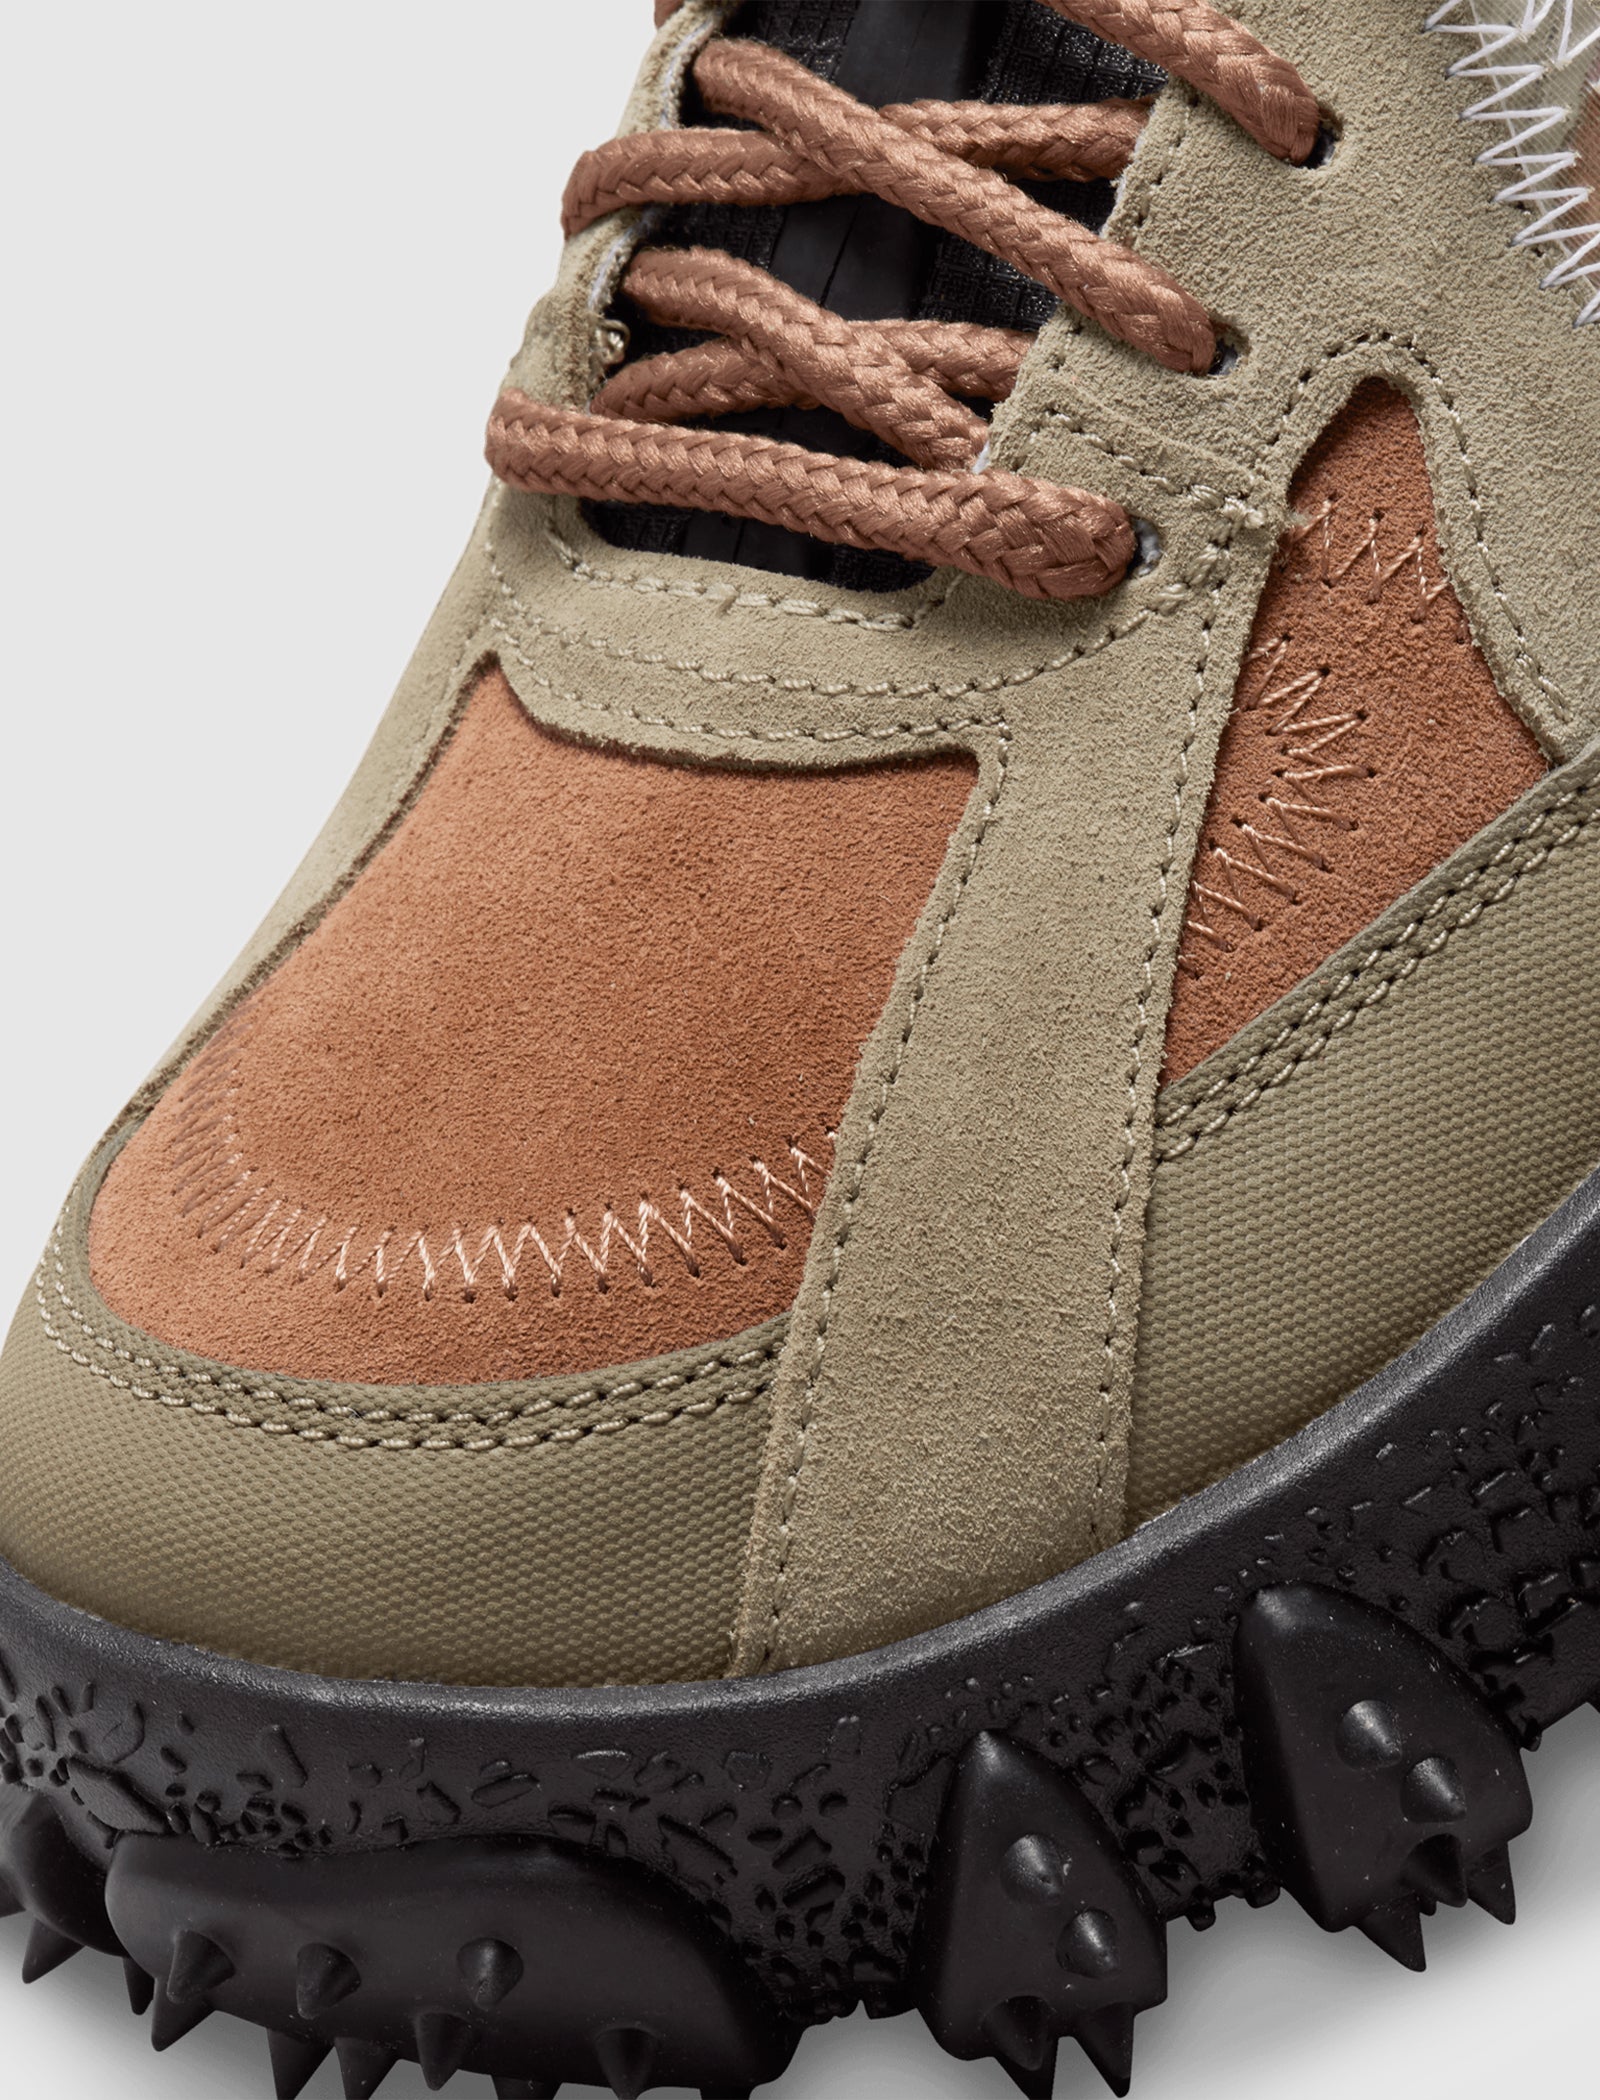 OFF-WHITE AIR TERRA FORMA "ARCHAEO BROWN"